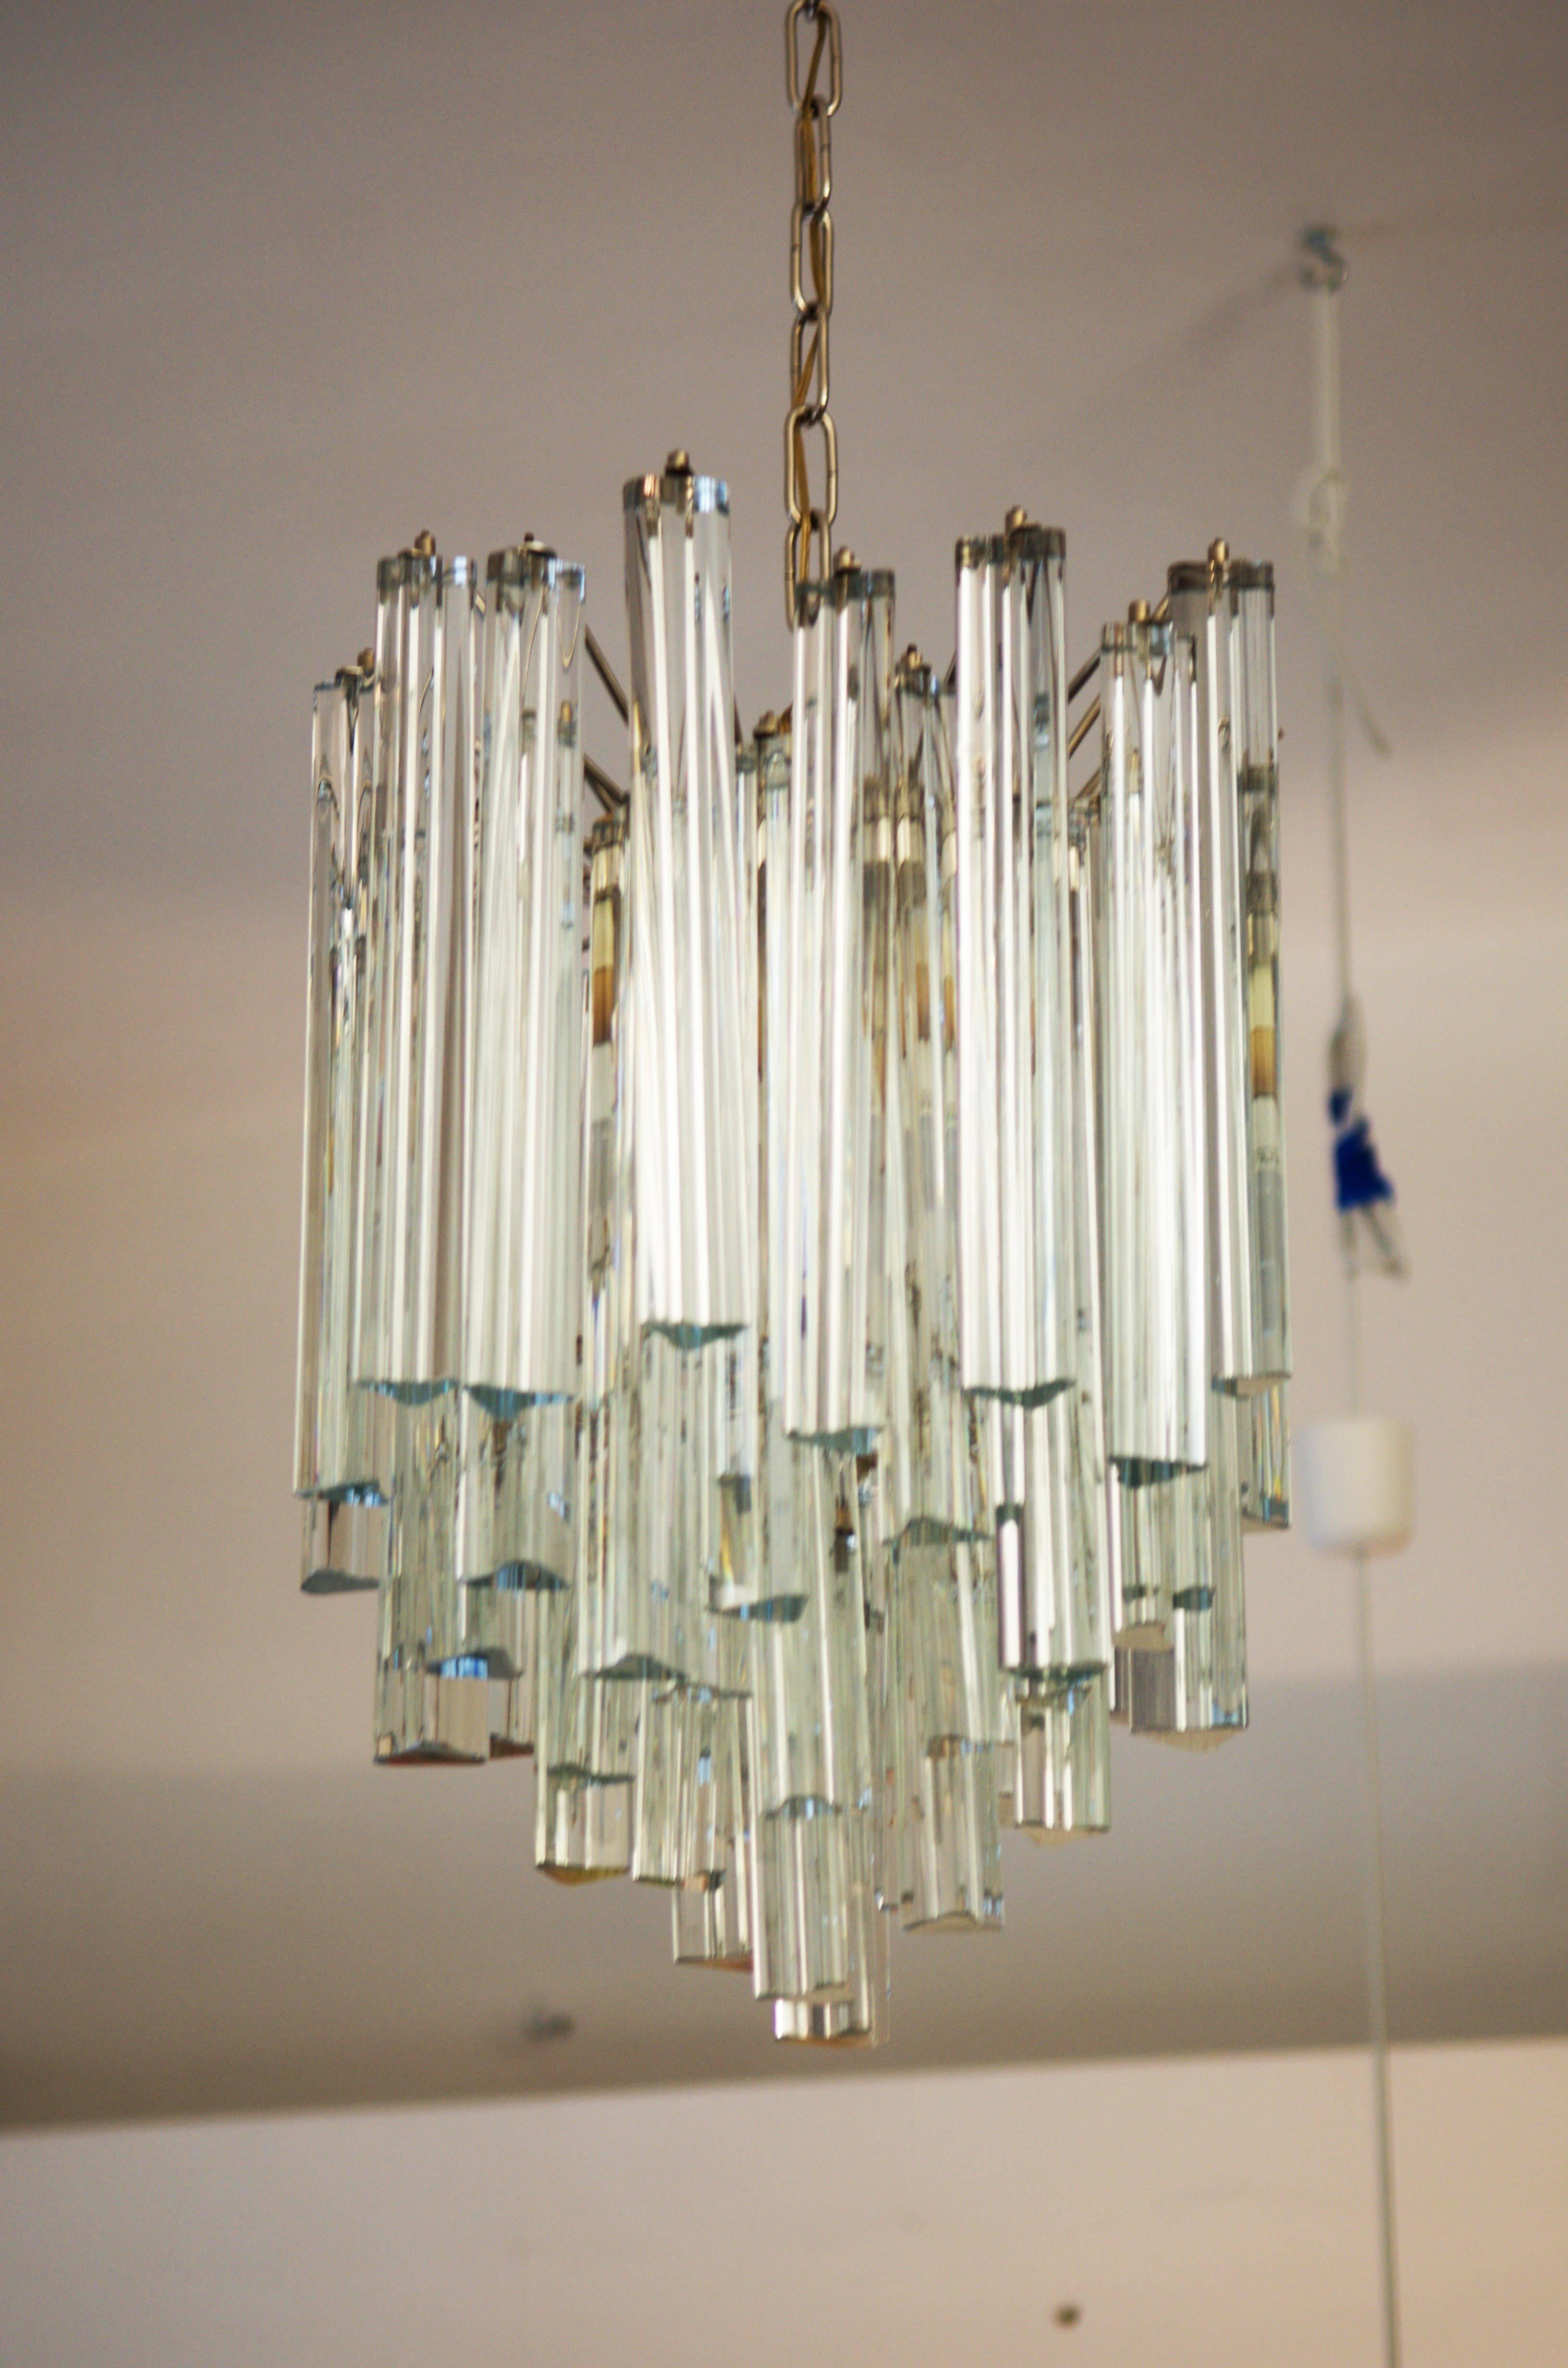 Mid-20th Century Lead Crystal Triangular Prisms Chandelier Attributed To Venini